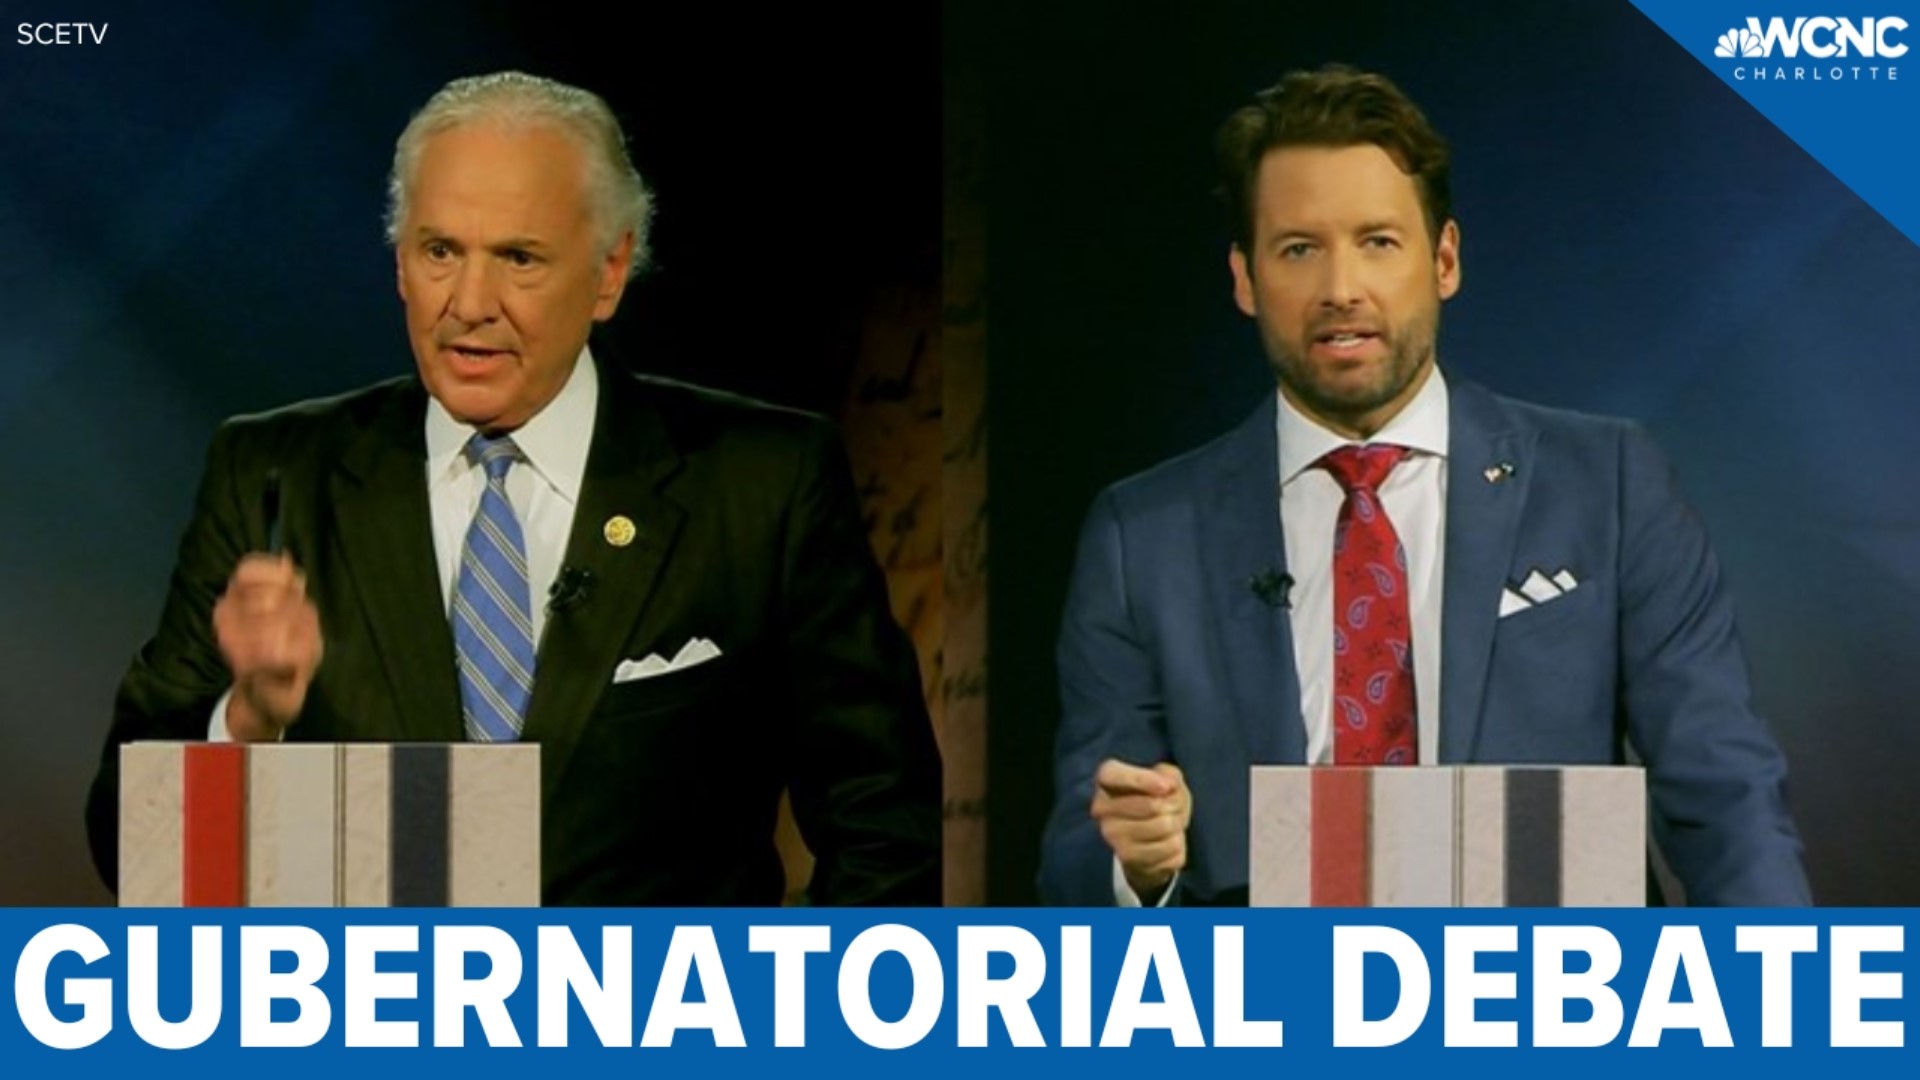 The two leading candidates for governor of South Carolina met for their first and only debate, sparing over abortion, COVID mandates, and the economy.